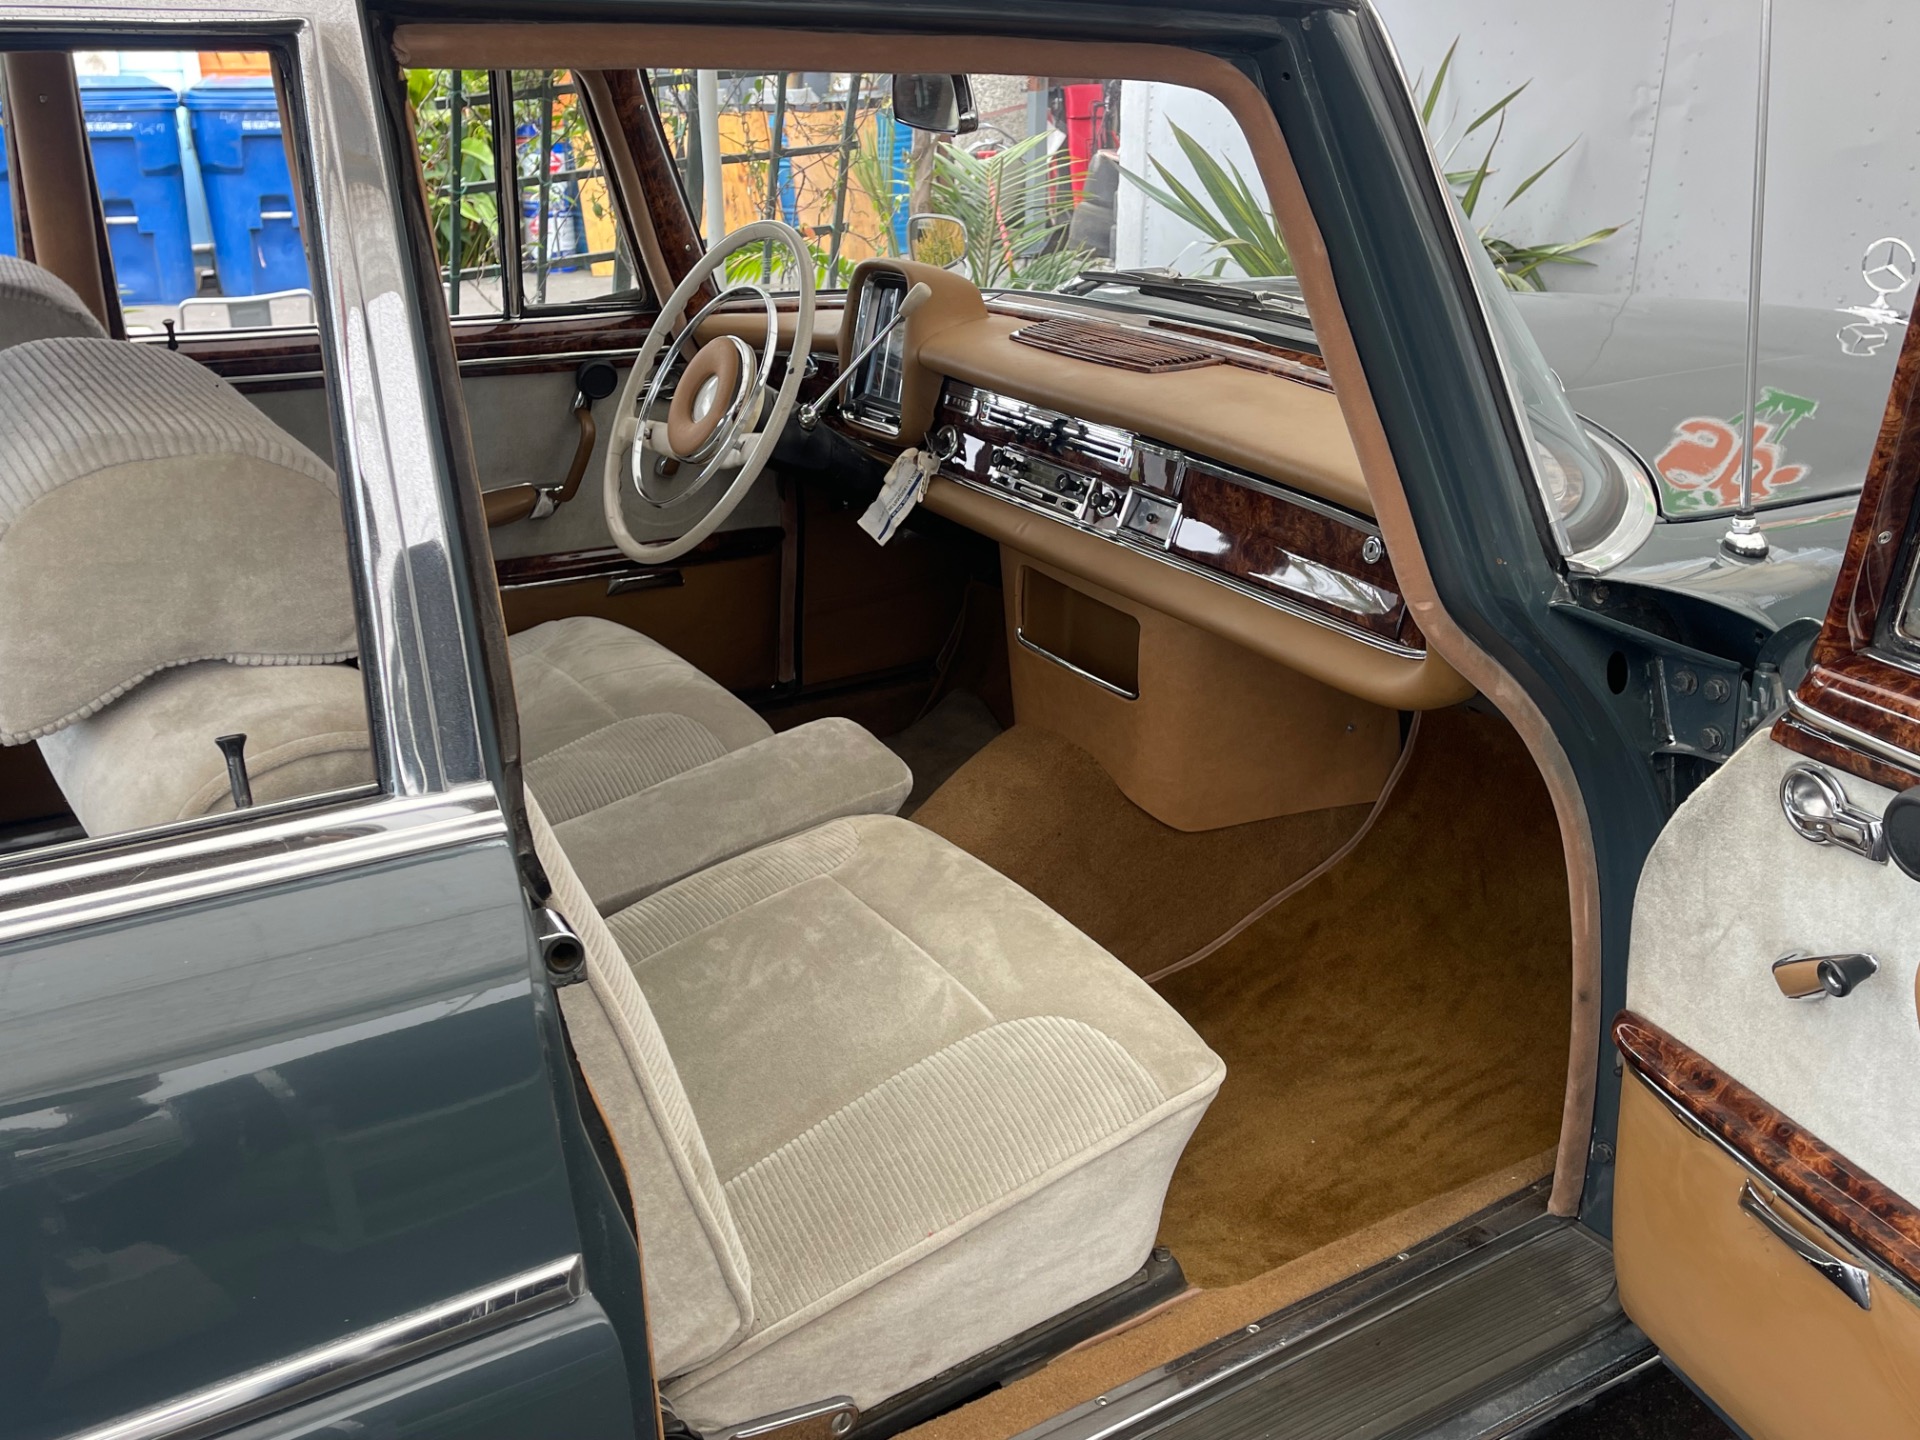 Used 1964 Mercedes Benz 300 SEL